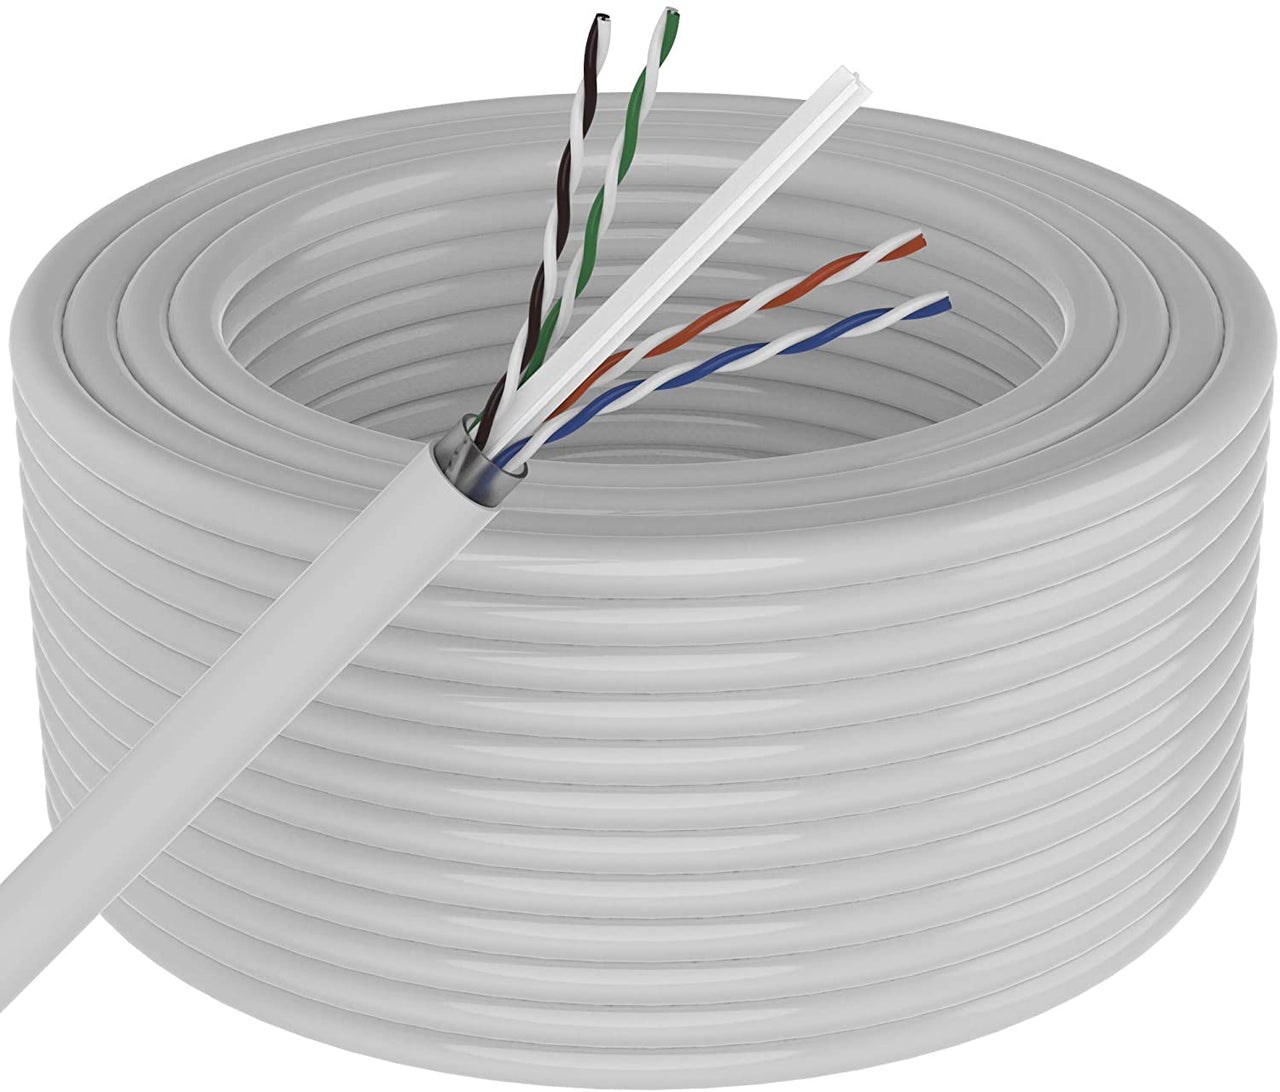 Absolute 1000' Cat6 Ethernet White Bulk Network Cable